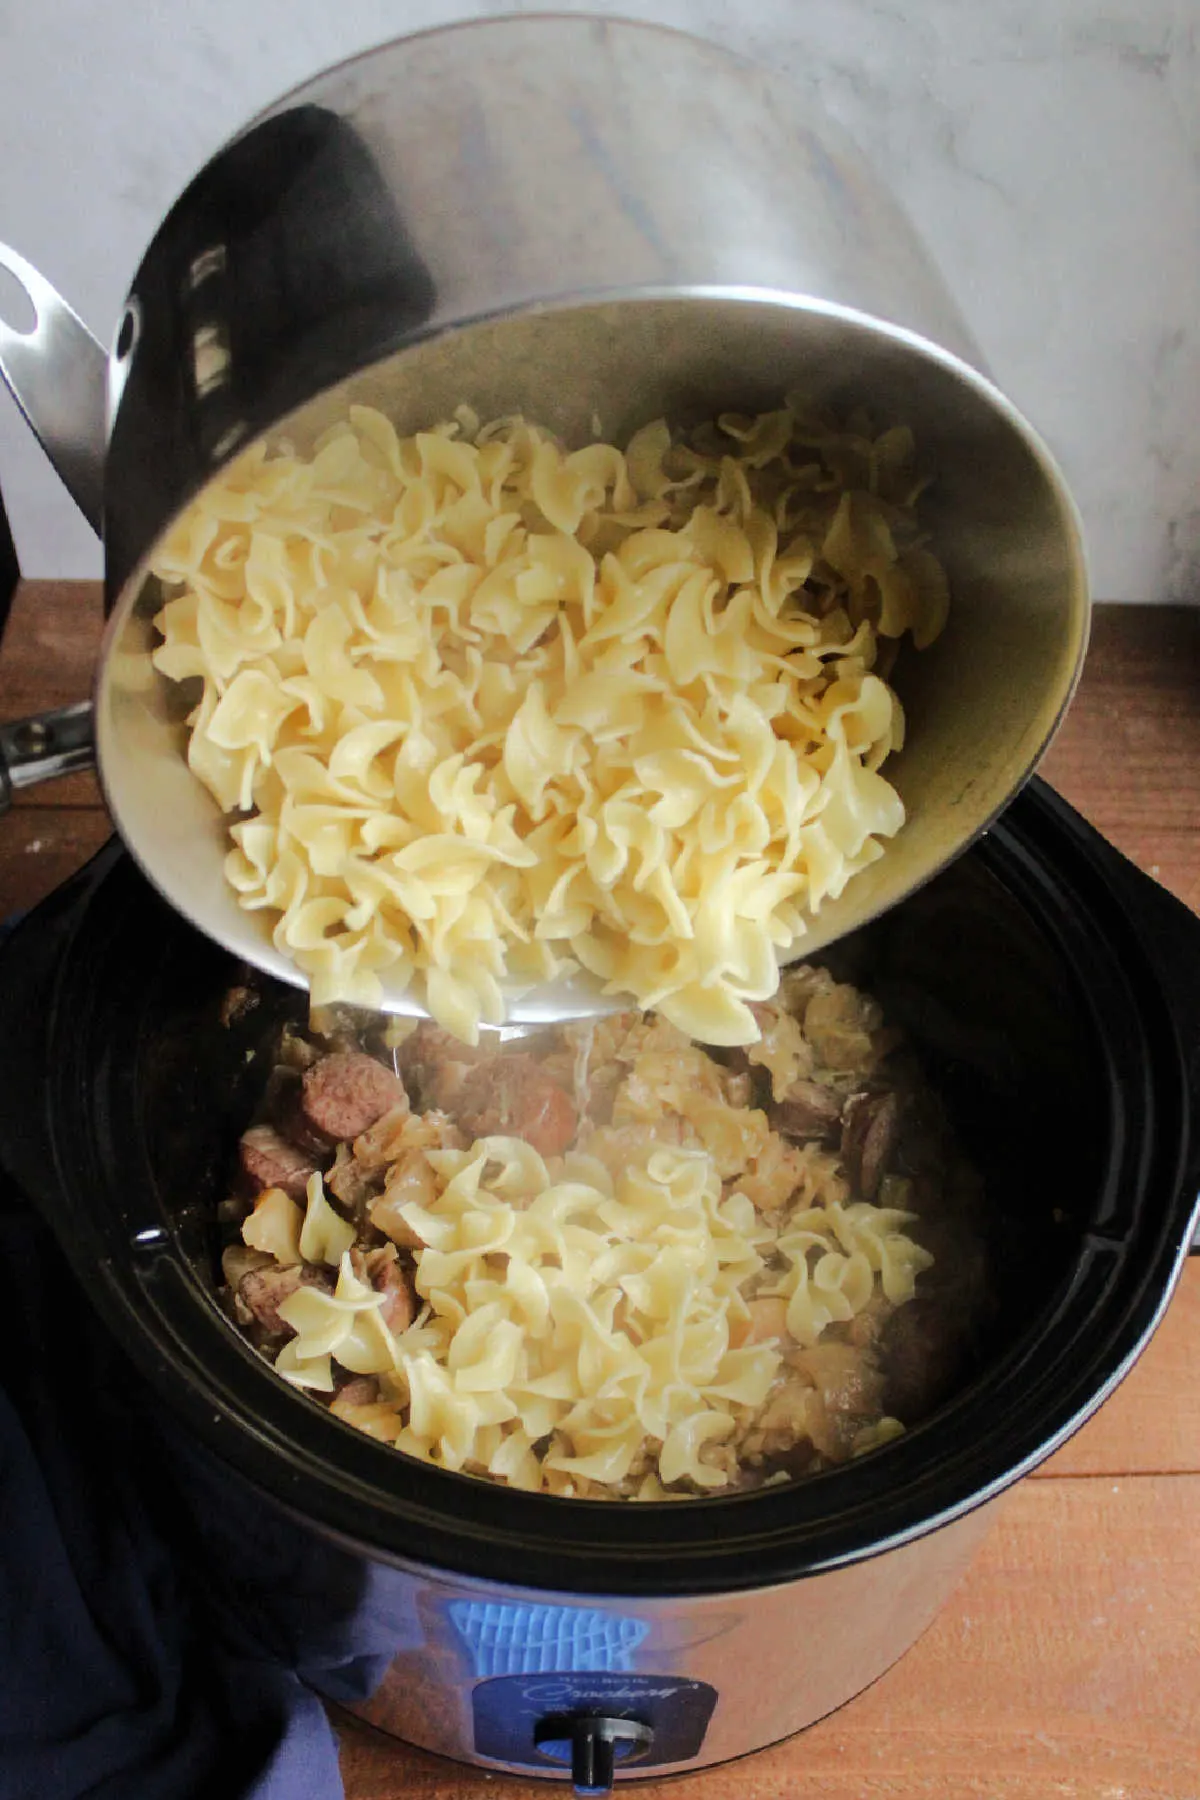 Pouring egg noodles into crockpot with cooked cabbage and kielbasa.